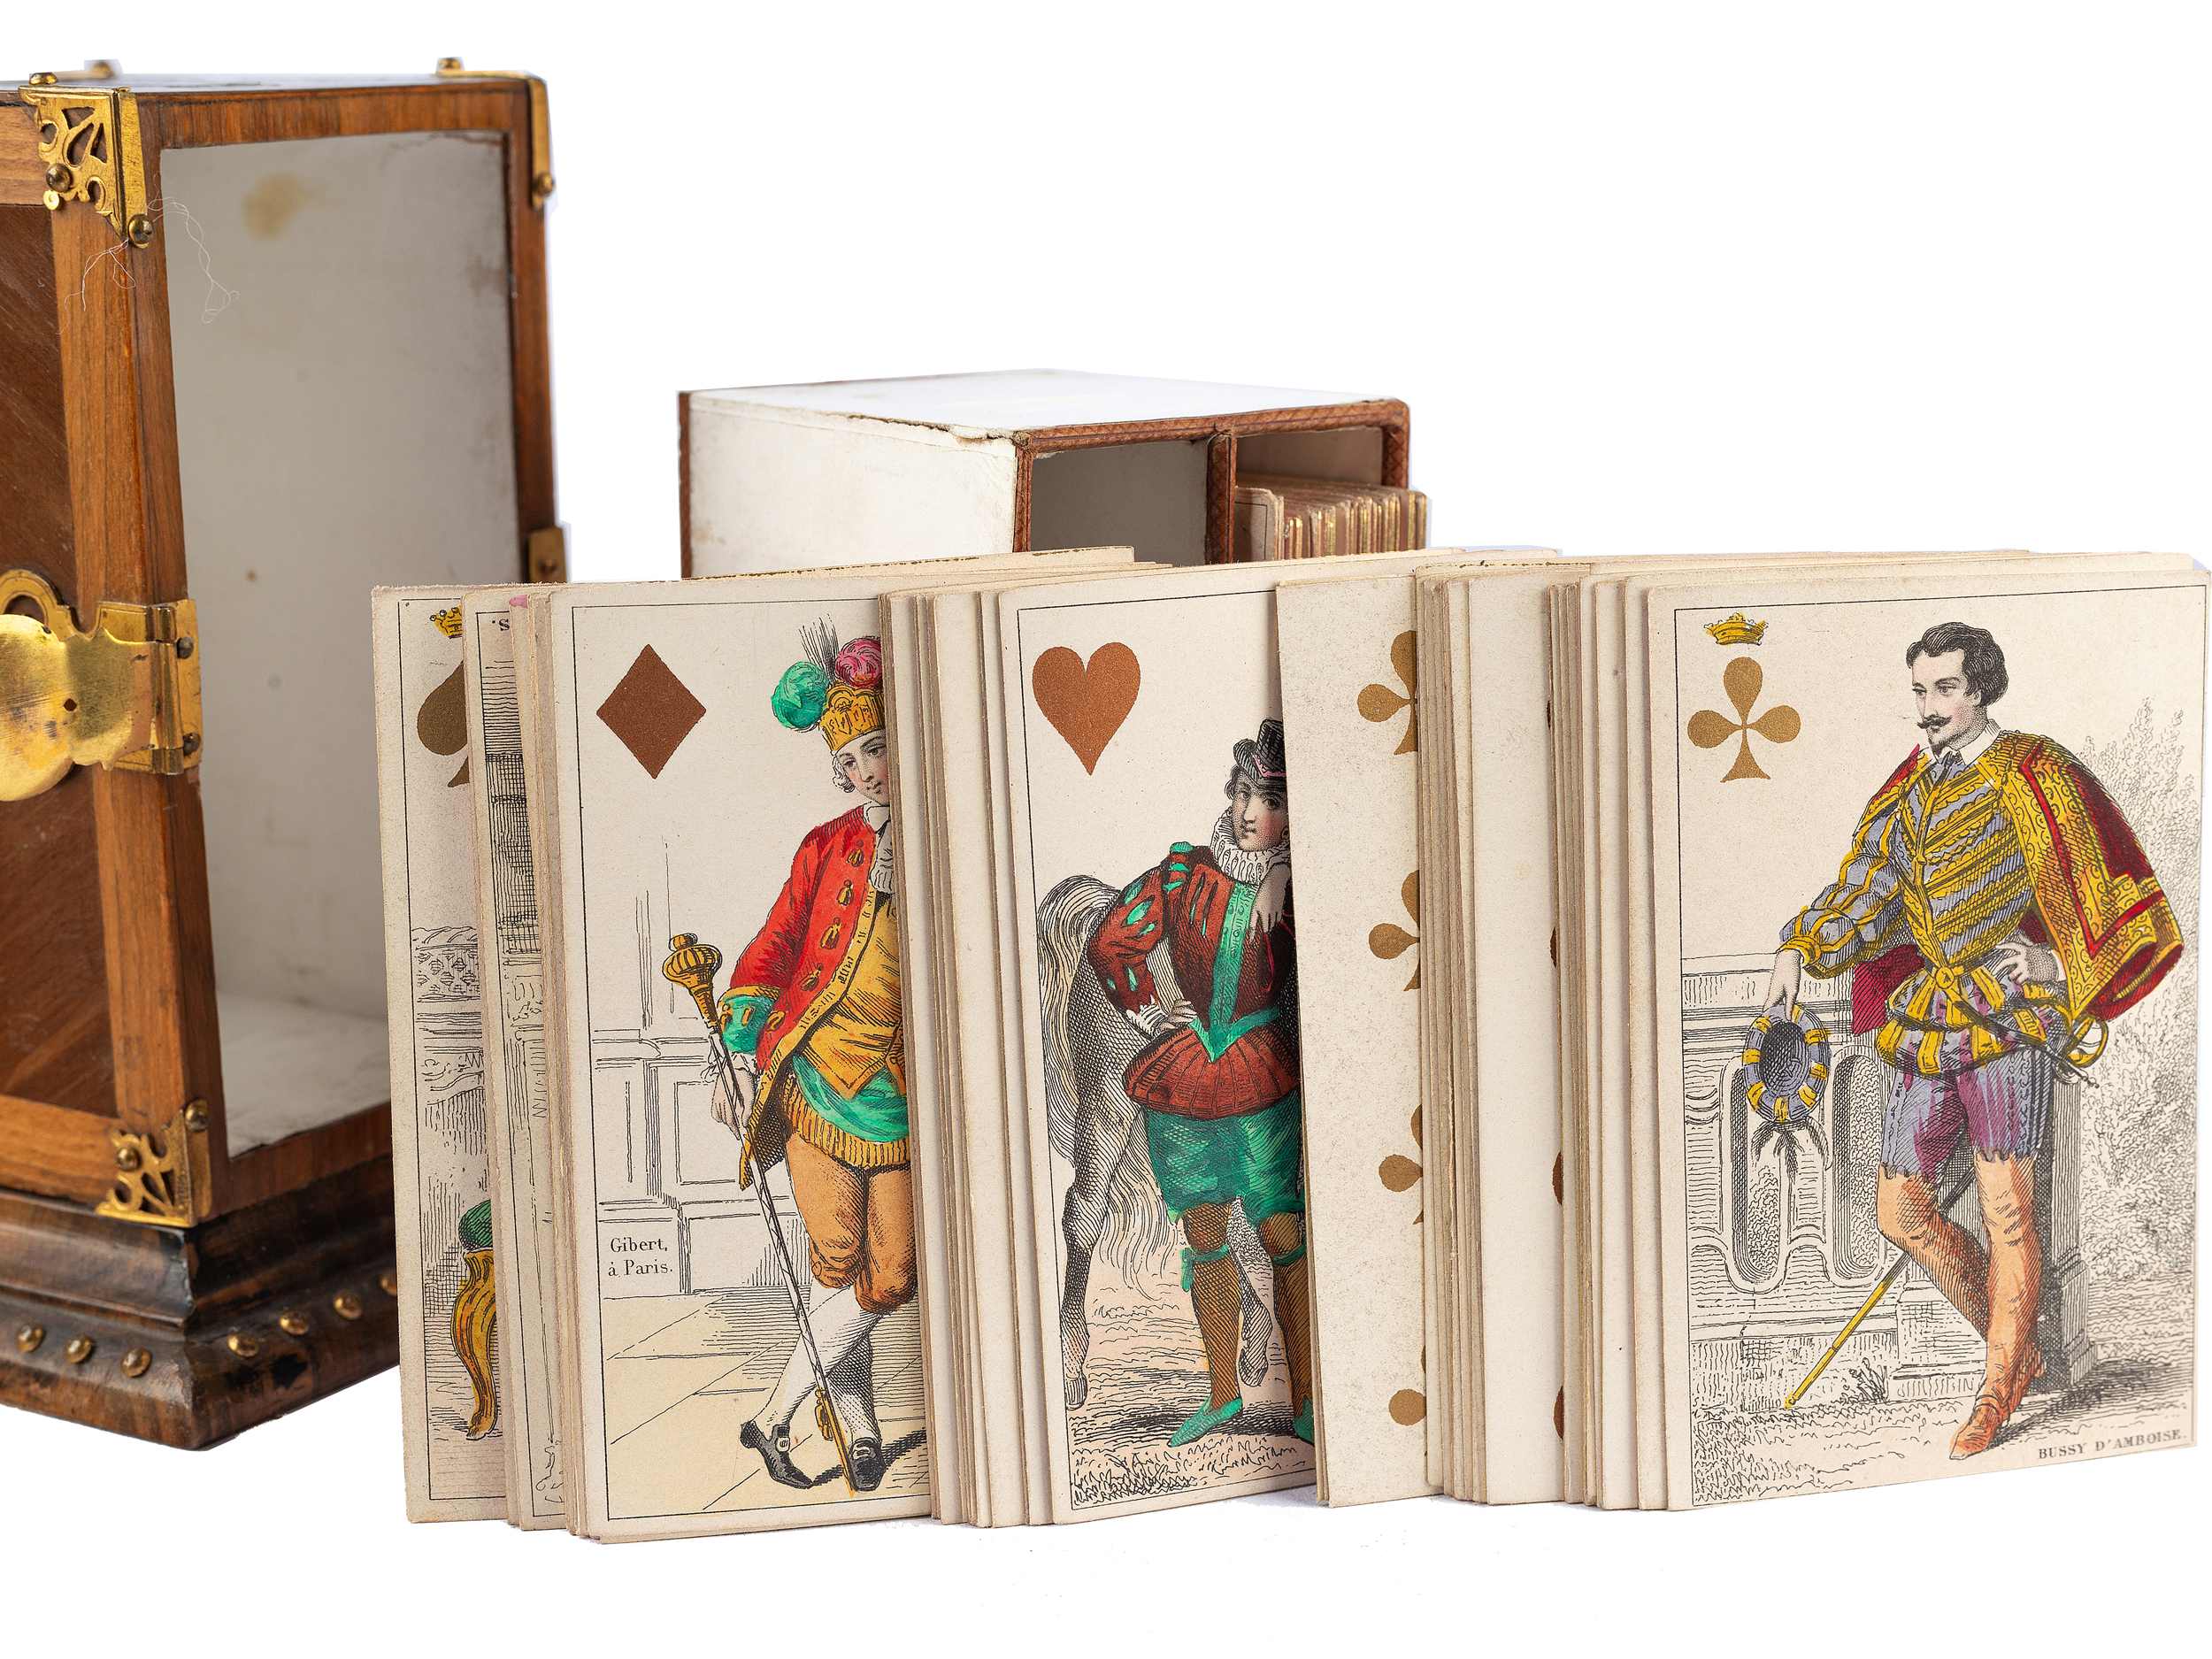 Playing card set, Austria, Mid-19th century - Image 3 of 5